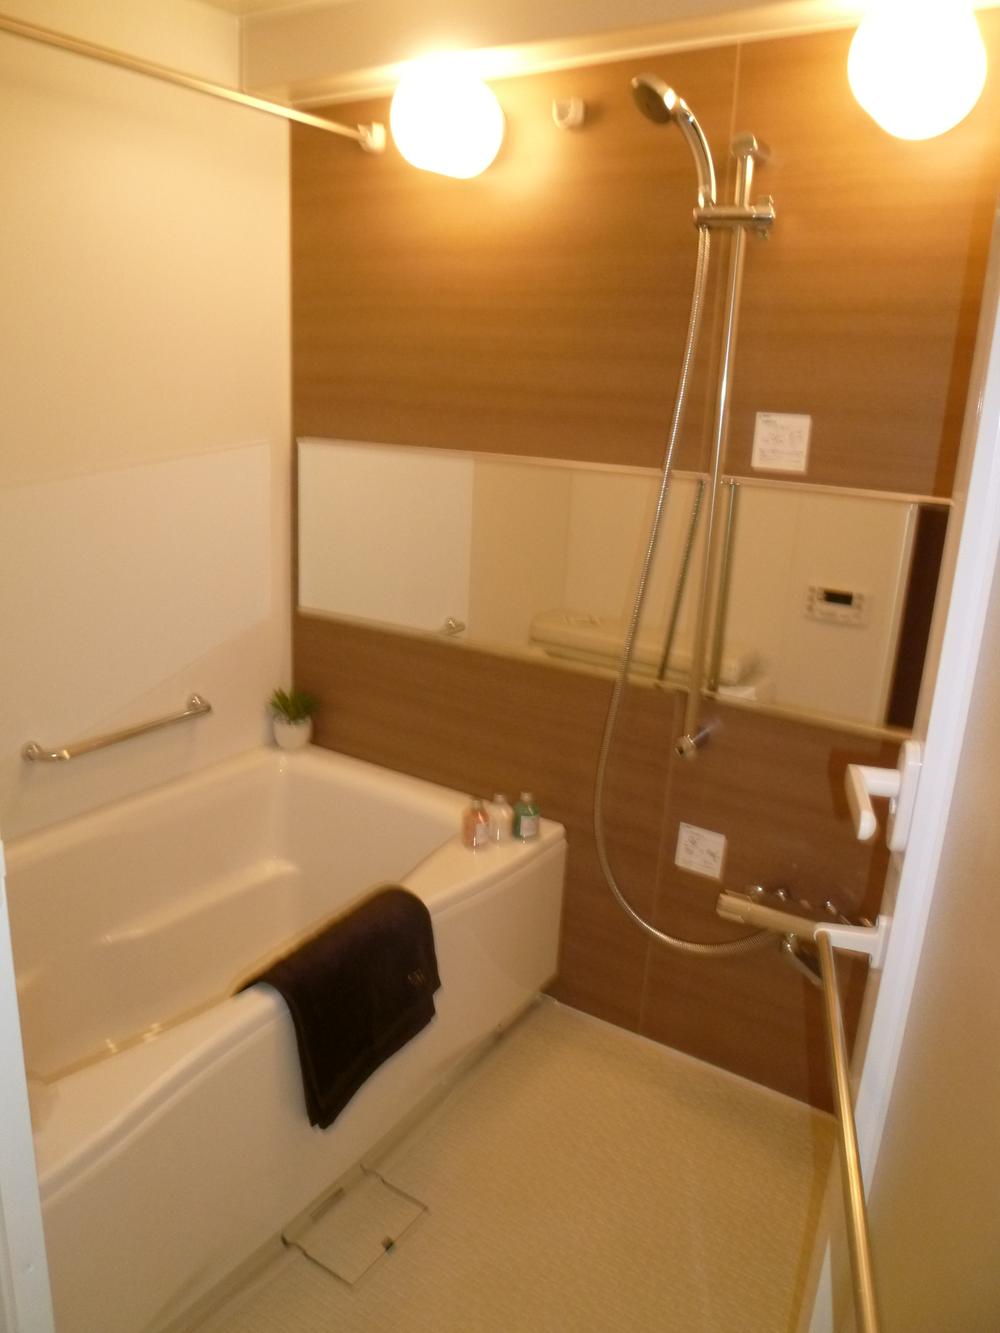 Bathroom. With add cook function ・ Bathroom with bathroom drying function